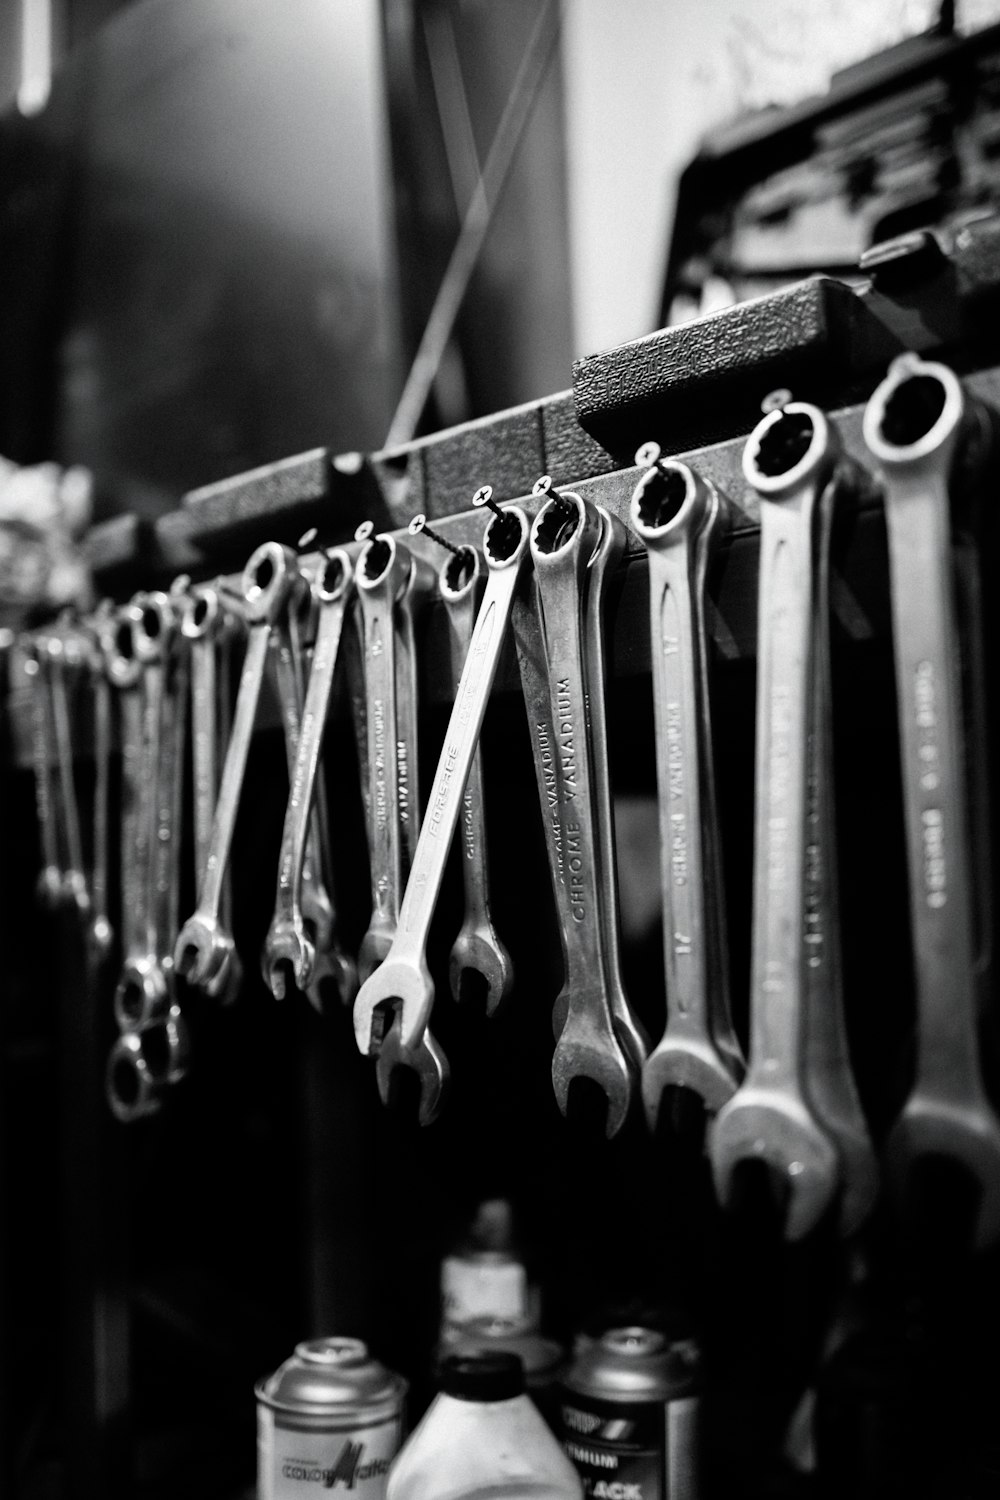 a bunch of wrenches are hanging on a rack